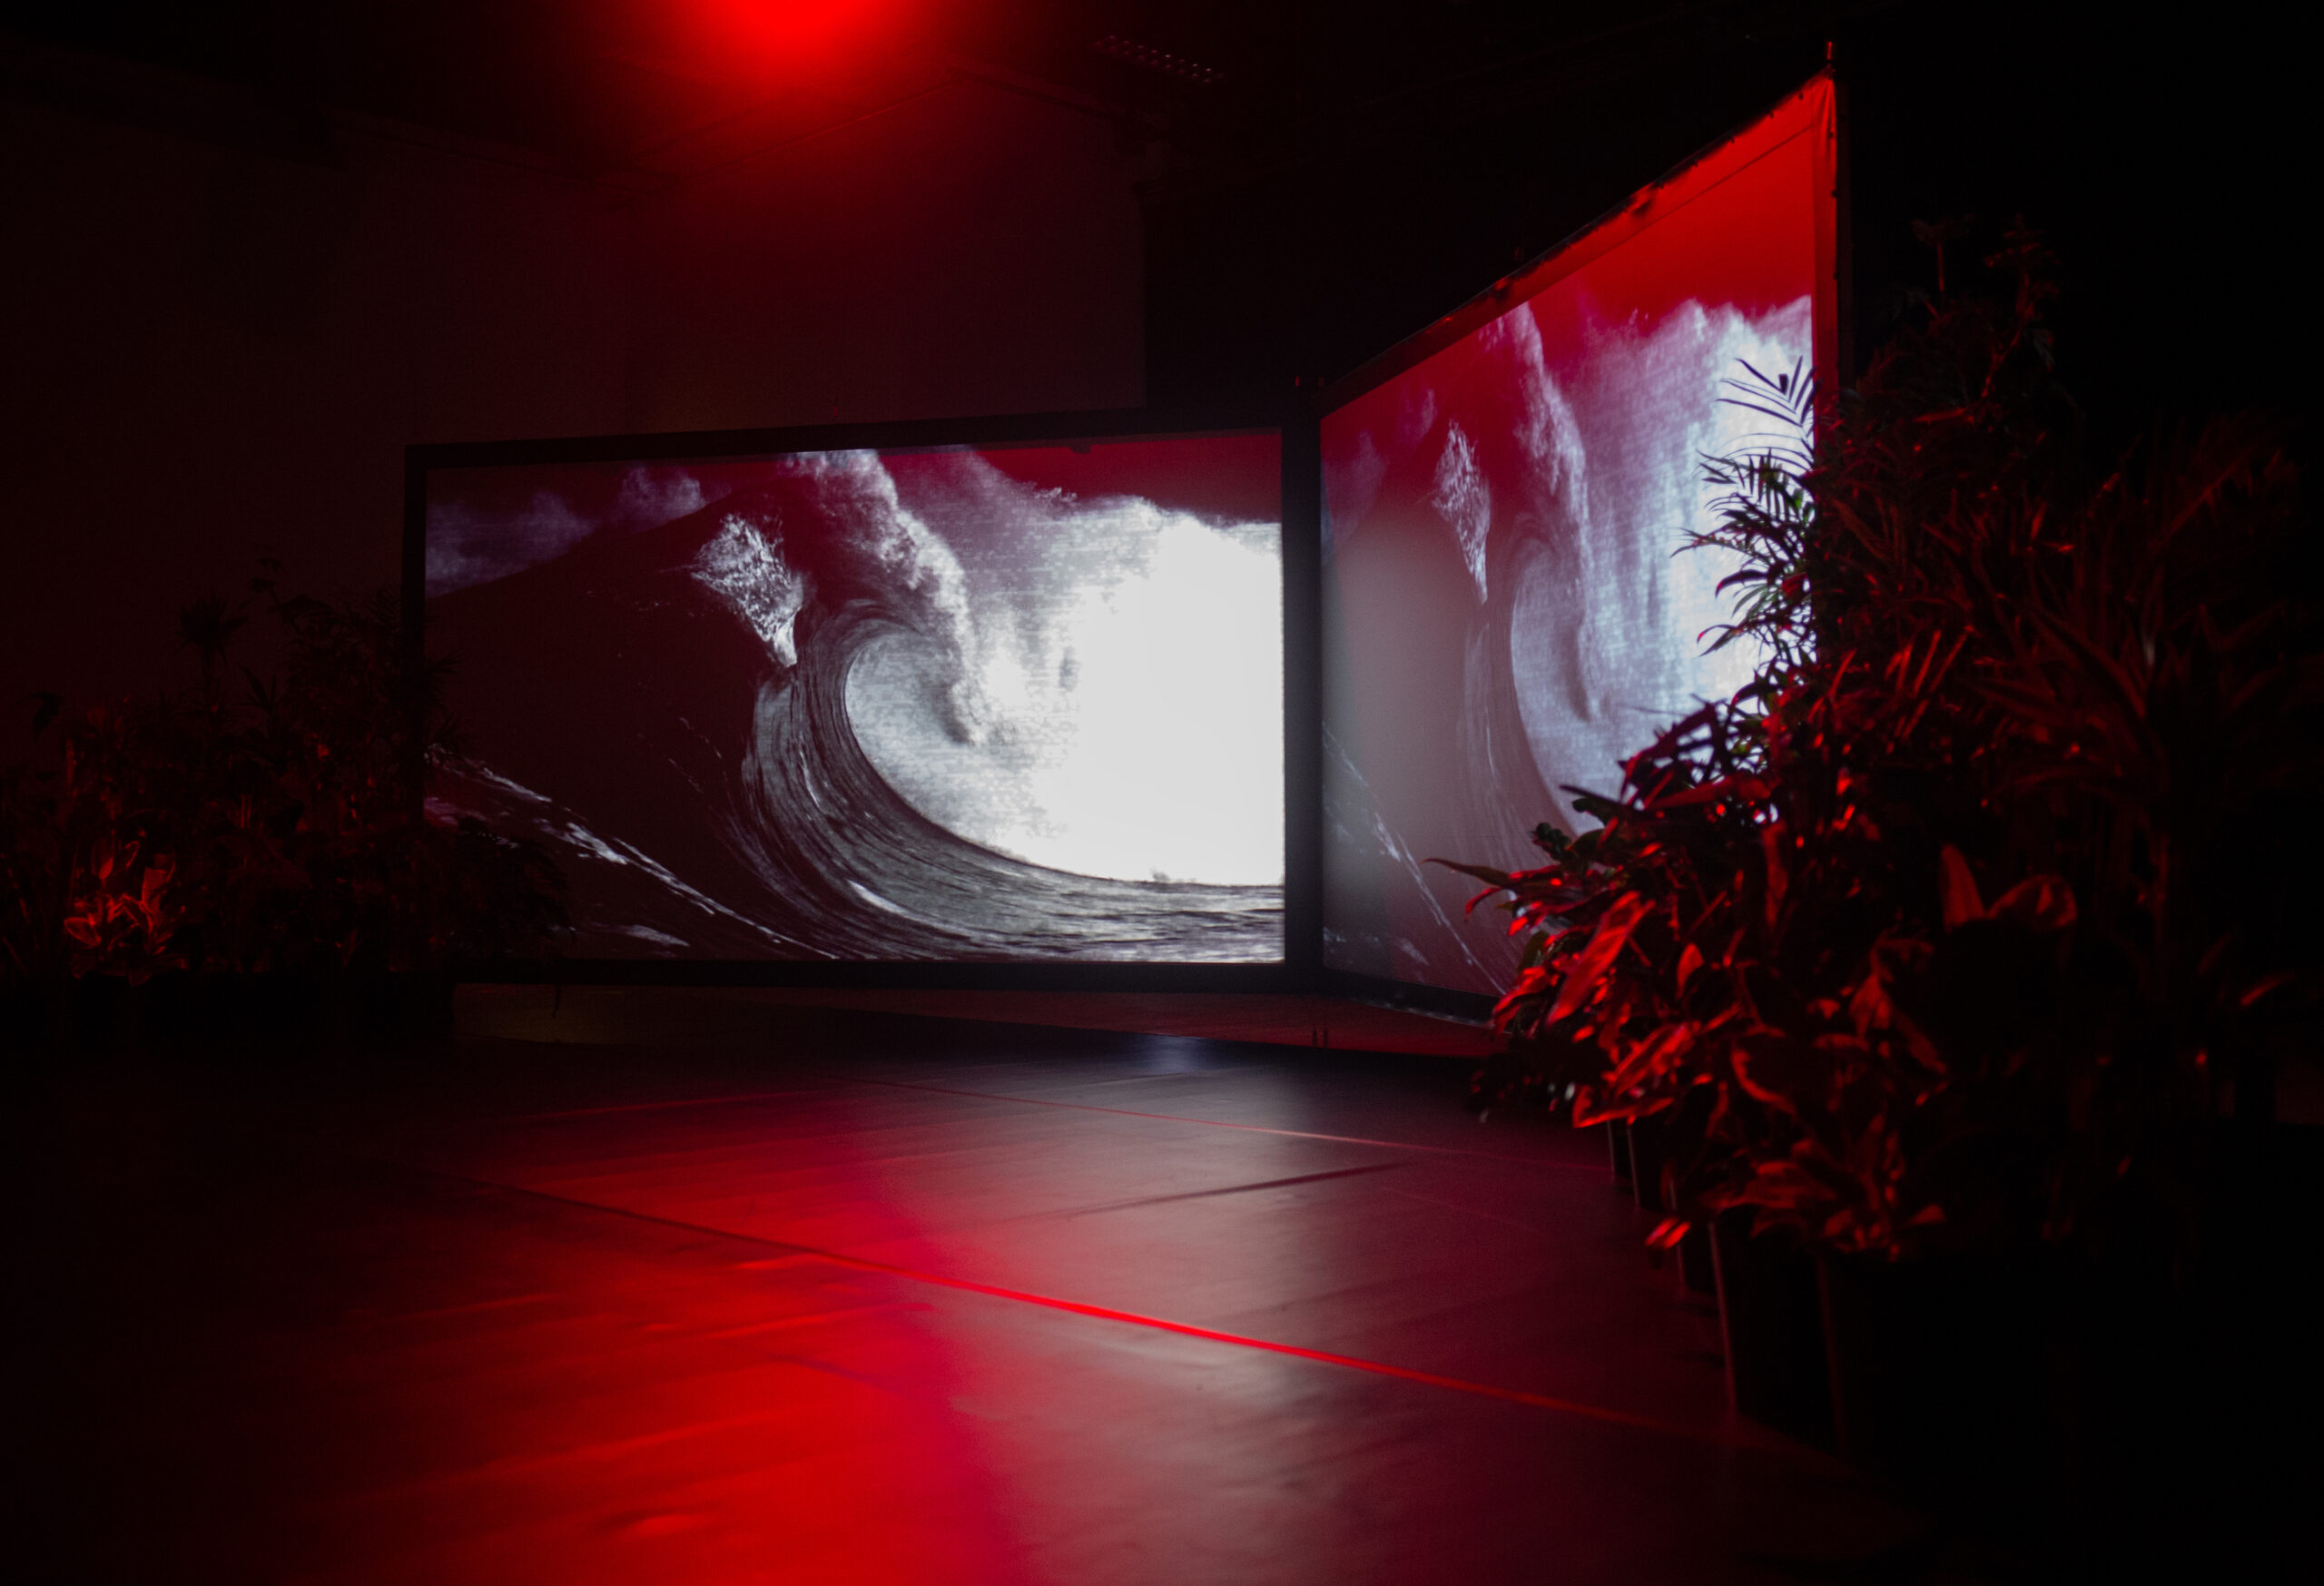 A photograph of two large screens displayed like an open book, in a darkened room, lit with soft red light. On the screens are black and white, grainy images of waves, curled and crashing. on either side of the screens are potted plants, the foliage is highlighted in the red light.